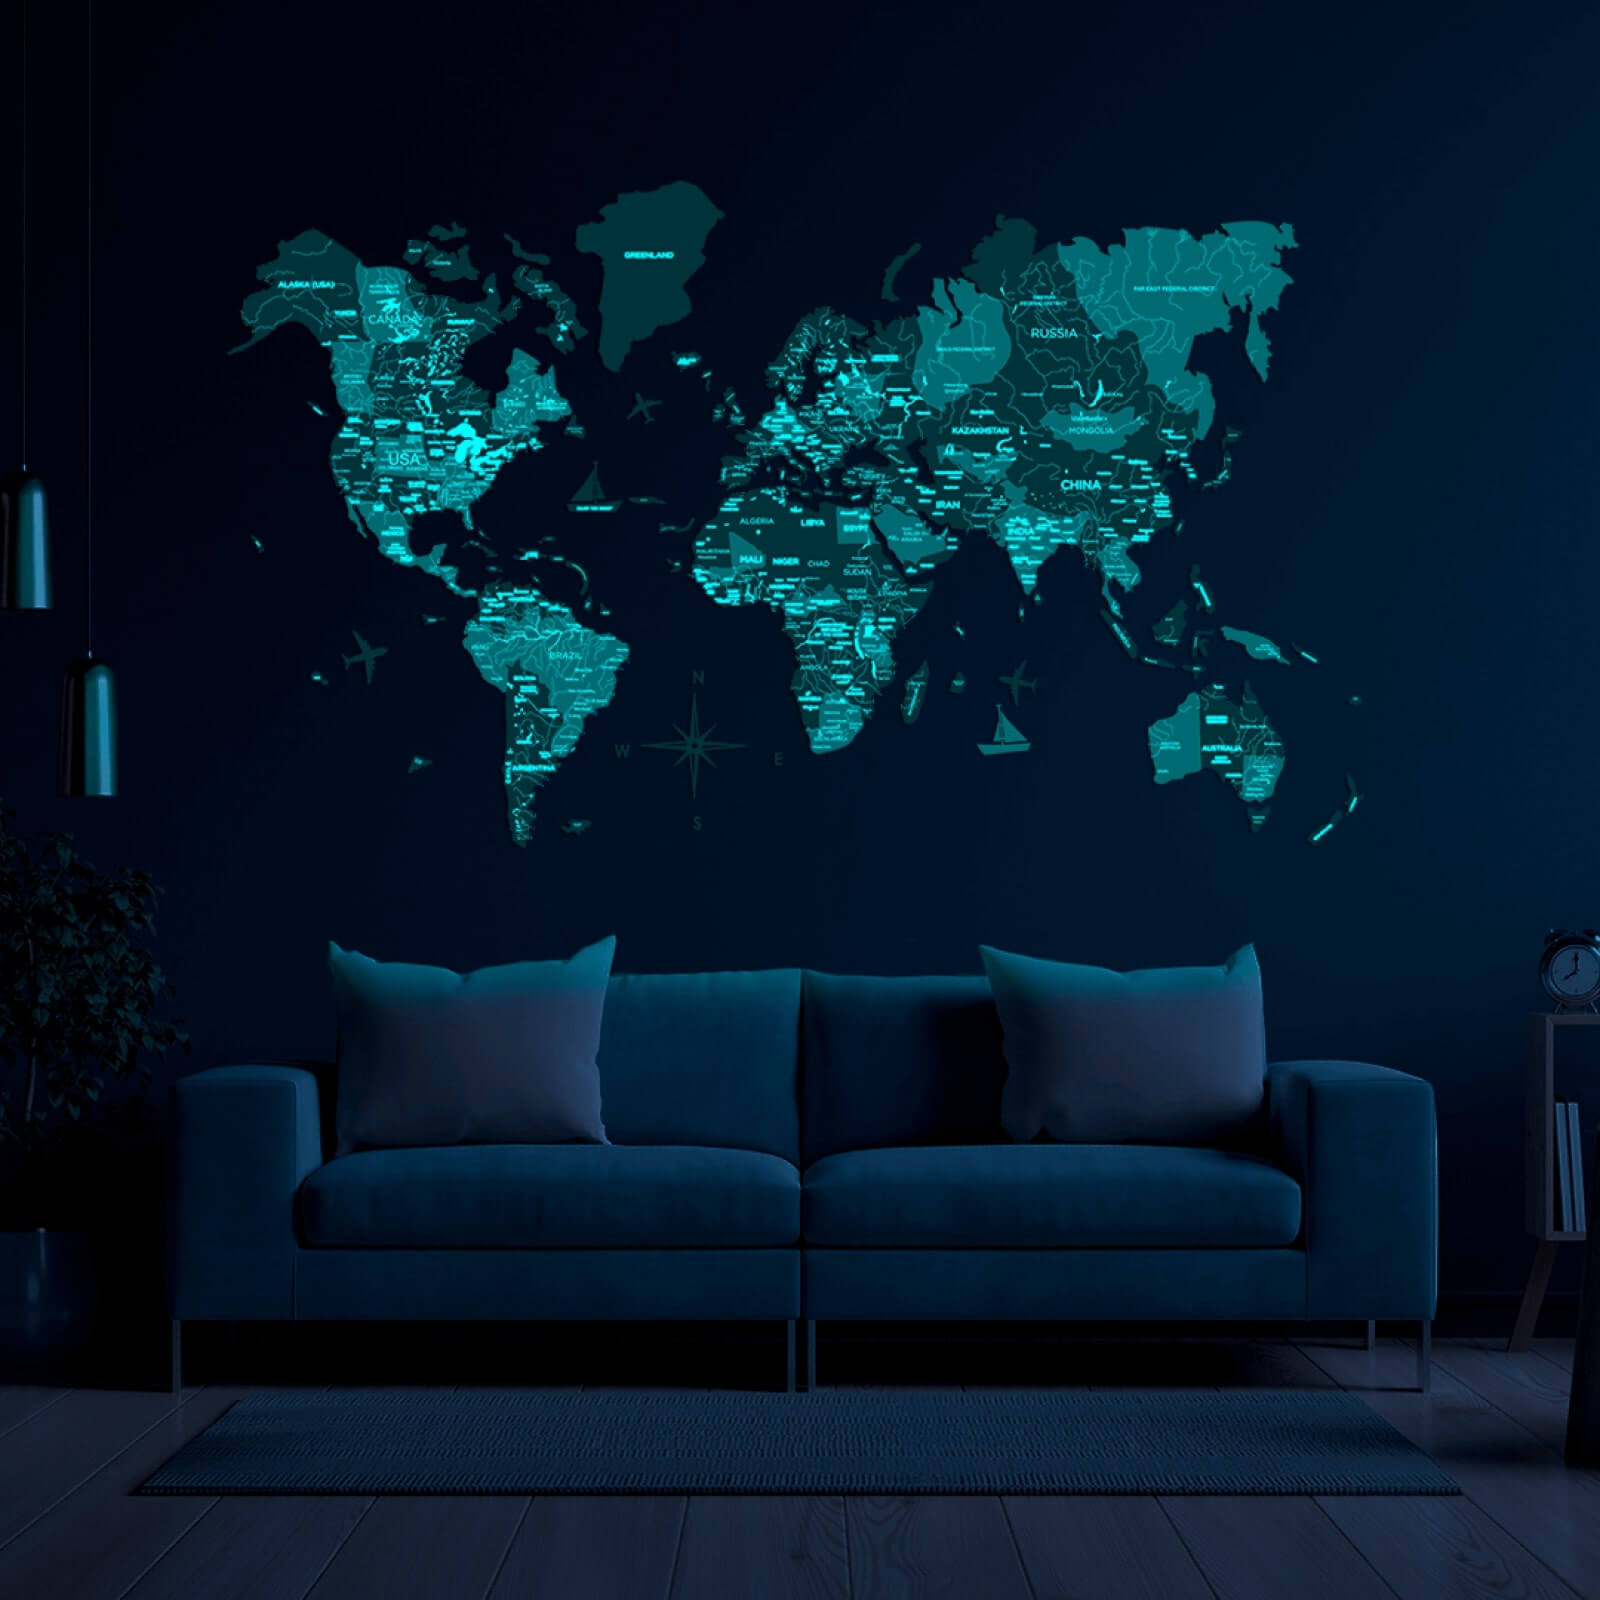 LED Light 3D Wood World Map for Wall Decor - Home Decor World Map with 6ft Power Cord - 3D Wood World Map Wall Art for Home & Kitchen or Office 